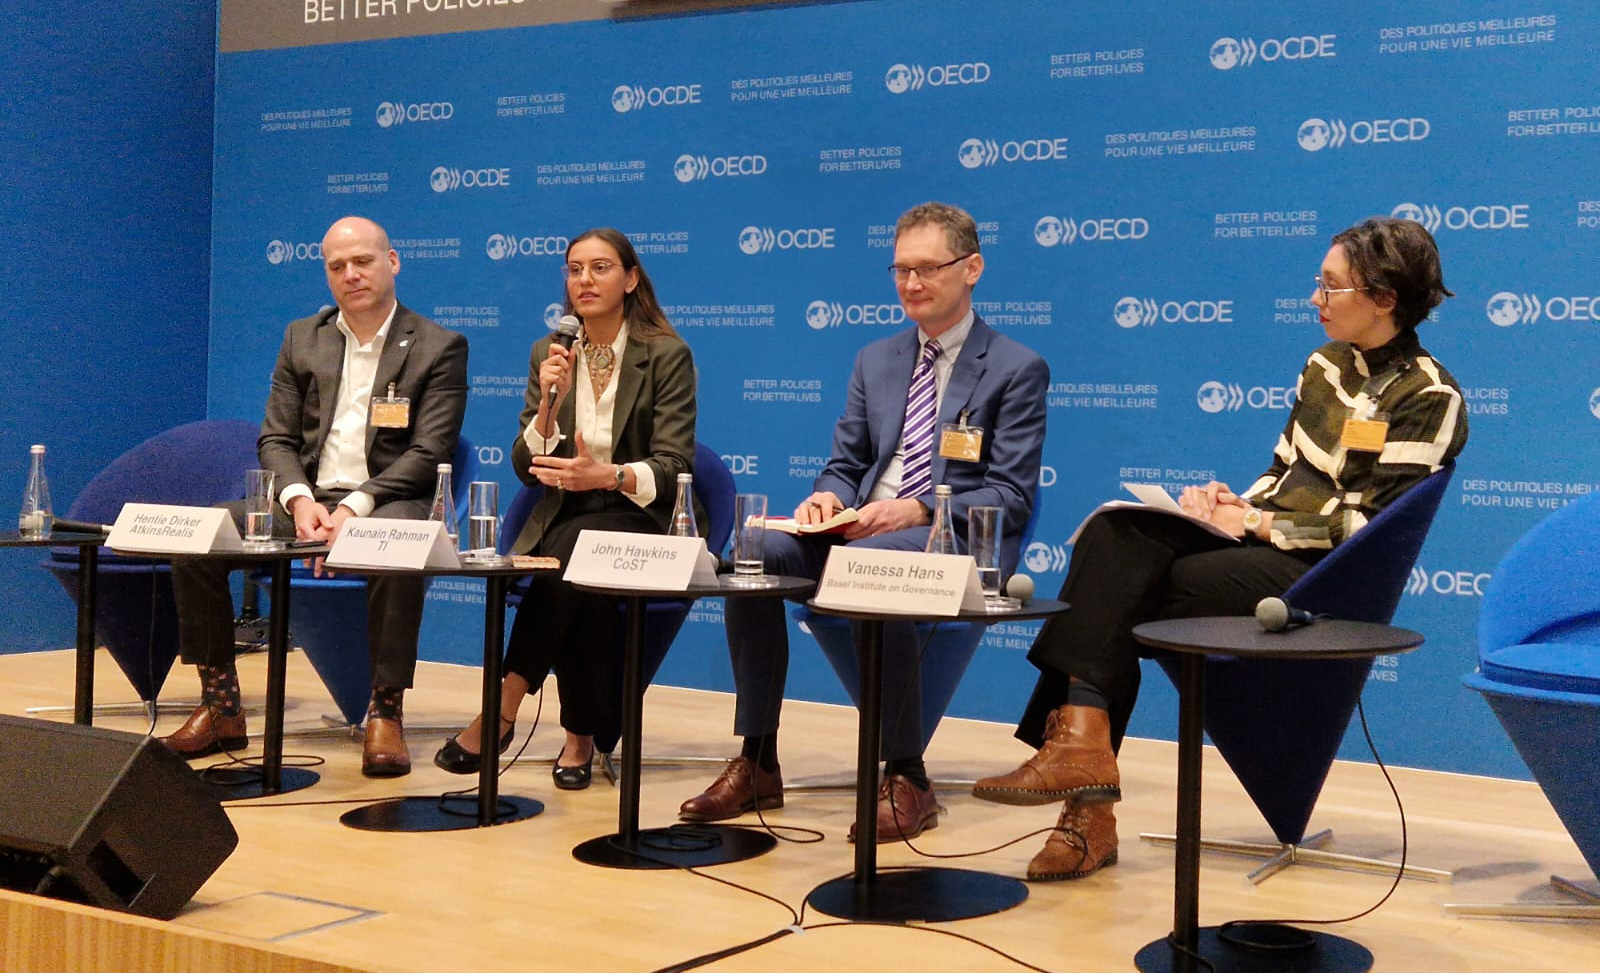 The Basel Institute's session at the 2024 OECD GACIF on "Addressing governance and corruption risks in infrastructure development through Collective Action", featuring Hentie Dirker, John Hawkins, Kaunain Rahman and Vanessa Hans.